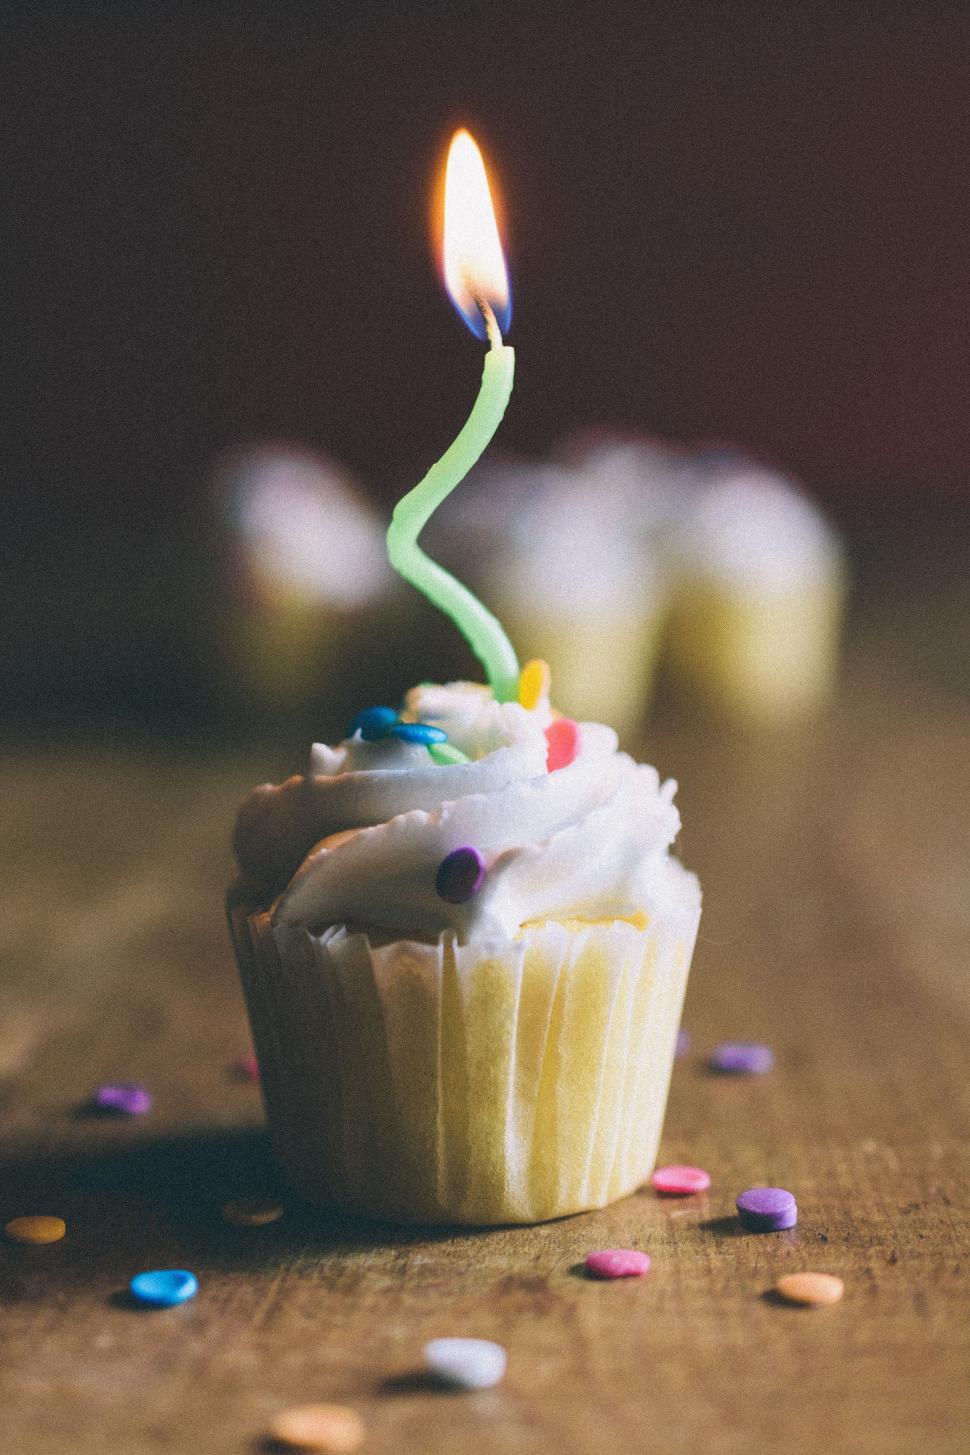 Free Image of Cupcake With Candle 